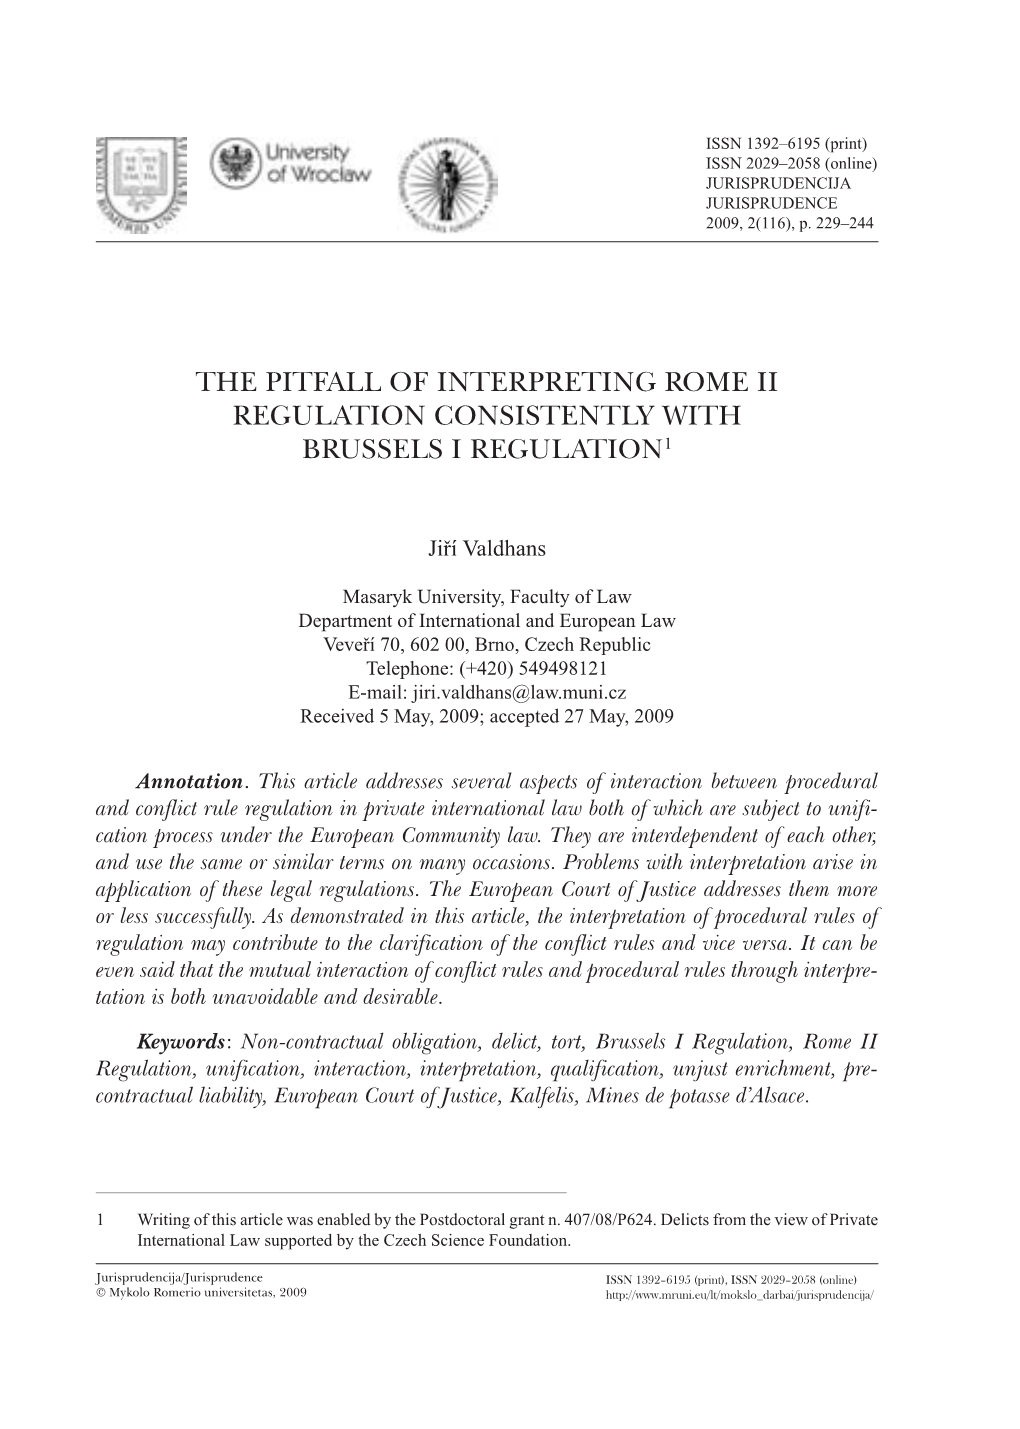 The Pitfall of Interpreting Rome II Regulation Consistently with Brussels I Regulation